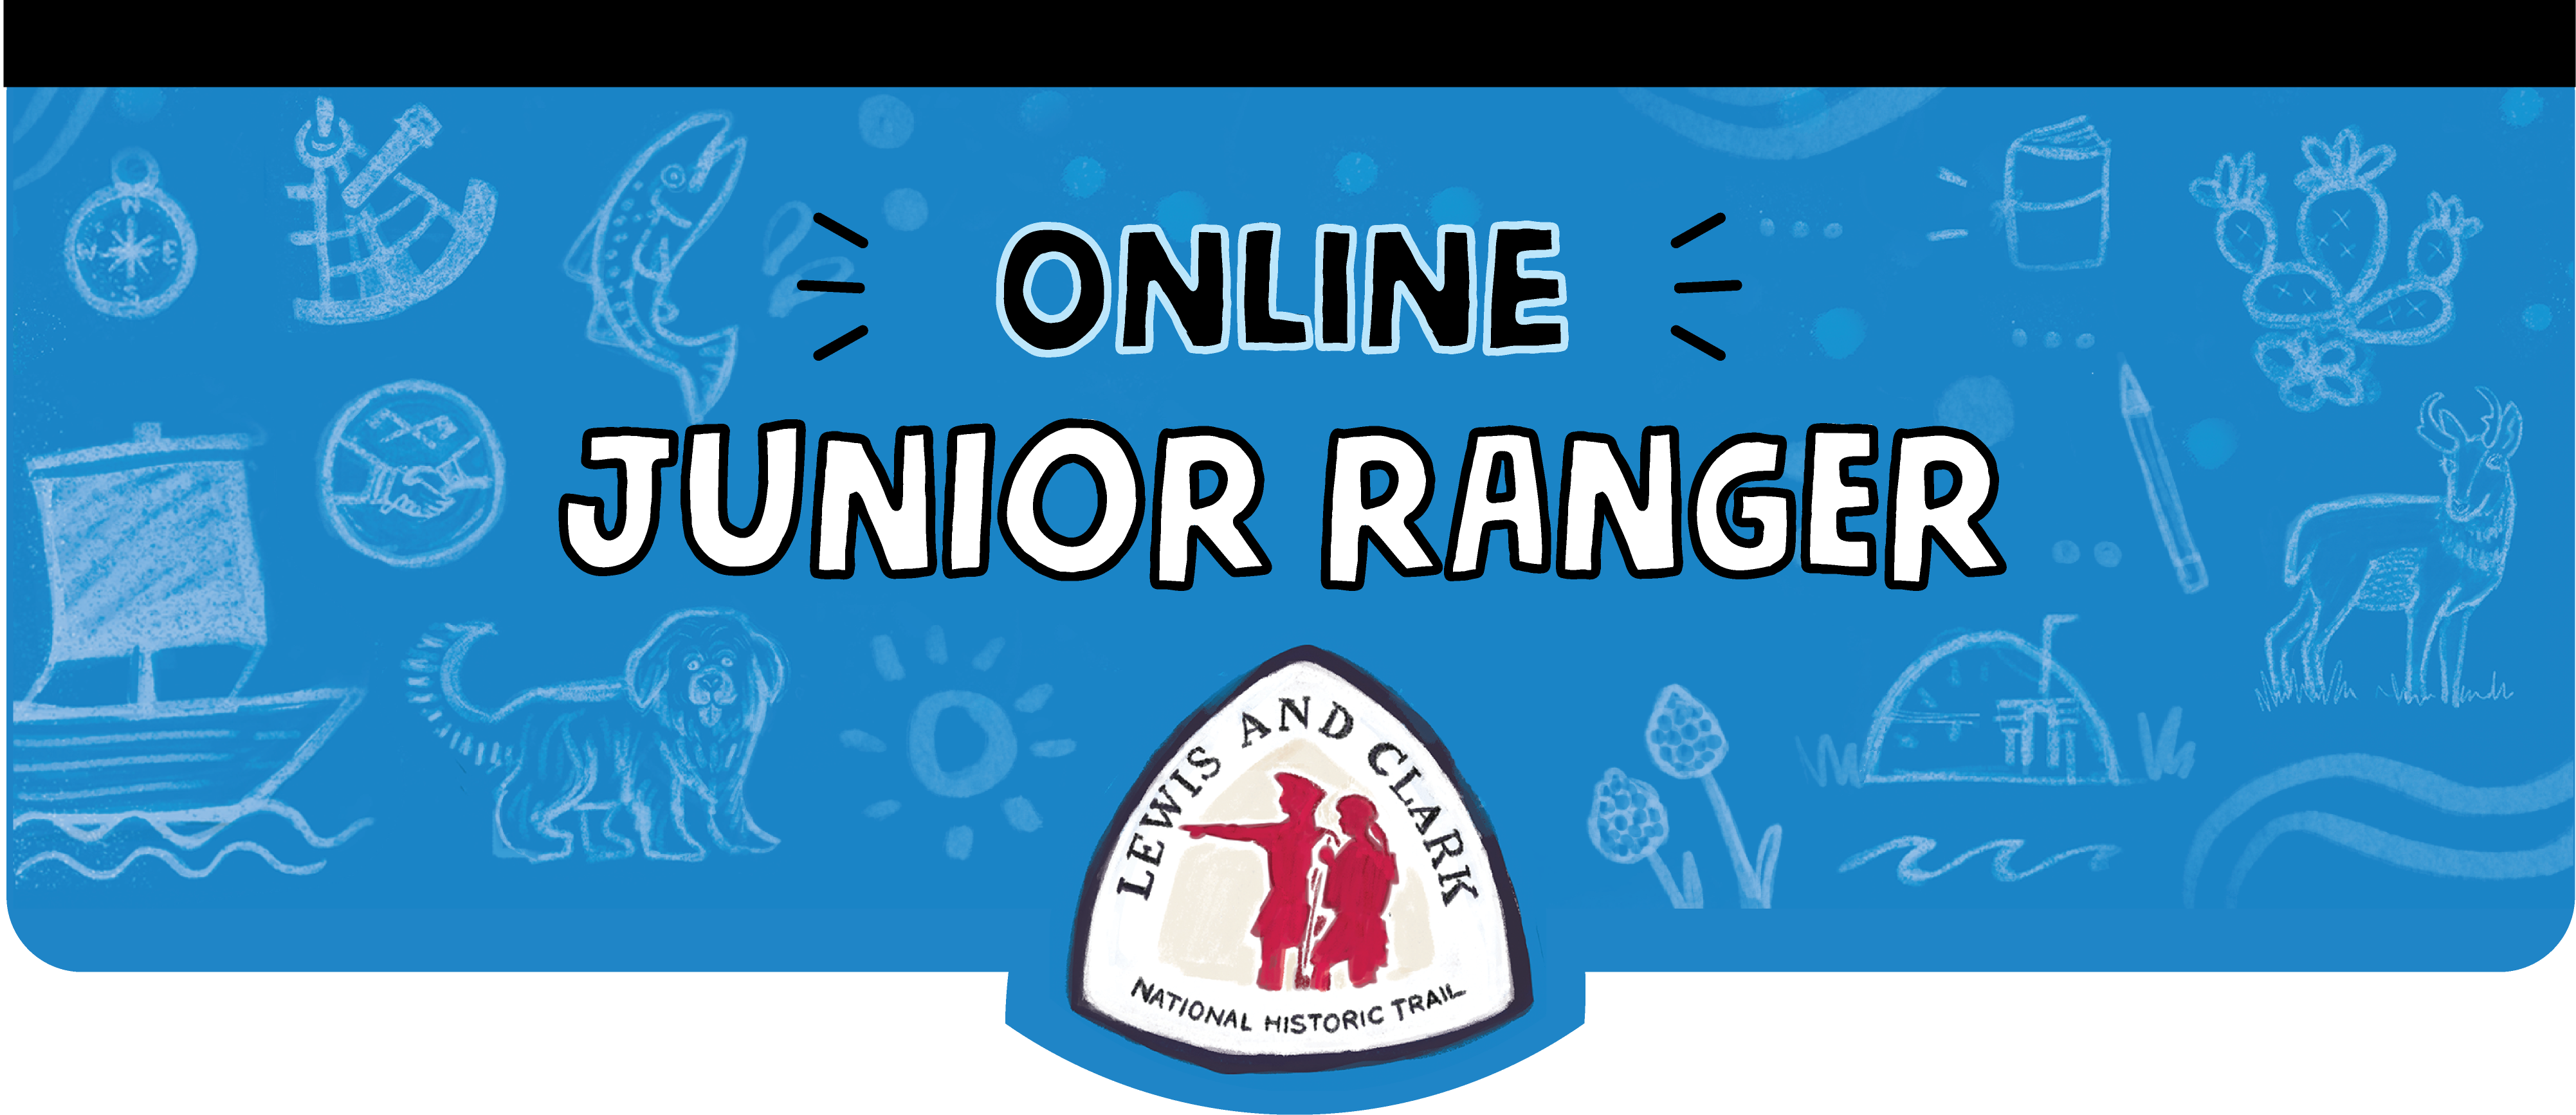 Online Junior Ranger. Lewis and Clark National Historic Trail Logo with silhouette of two explorers. Blue banner with sketches. Boat with a sail. Fluffy dog. Sextant. Compass. Salmon. Earth Lodge. Cactus. Journal. Antelope.